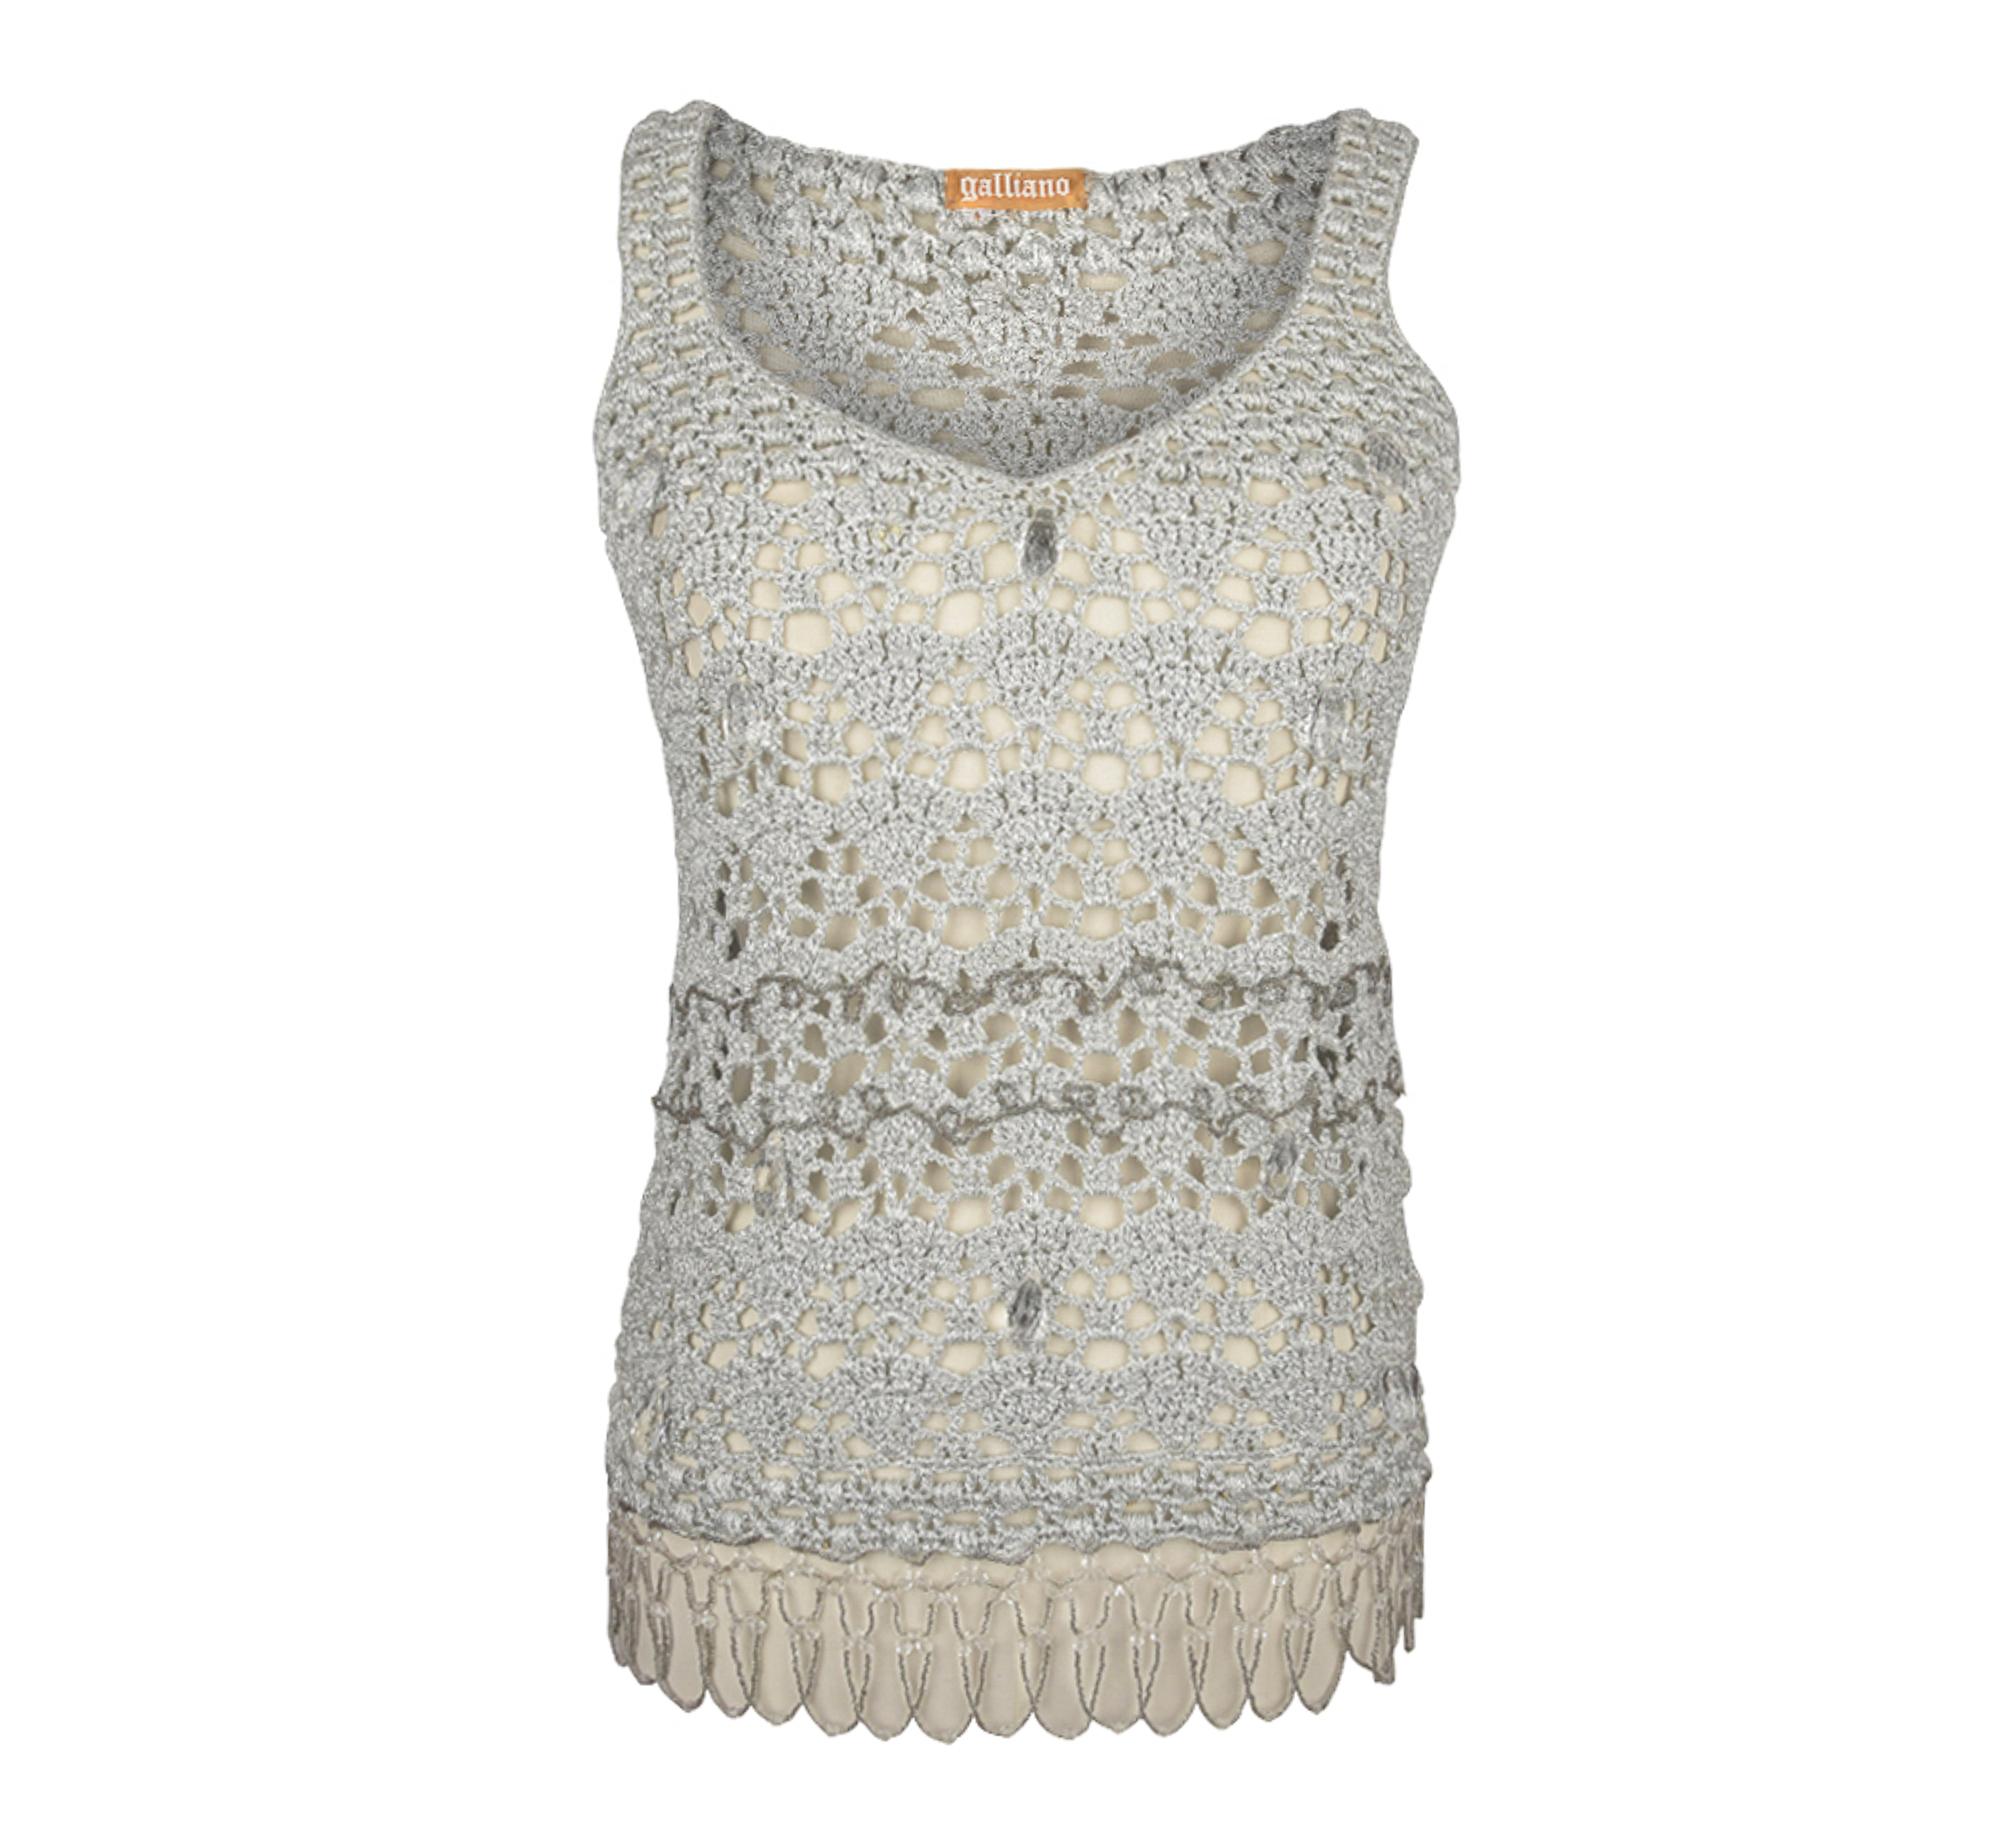 John Galliano Top Silver Crochet Faceted Large Crystals Beading Detail M In Good Condition For Sale In Miami, FL